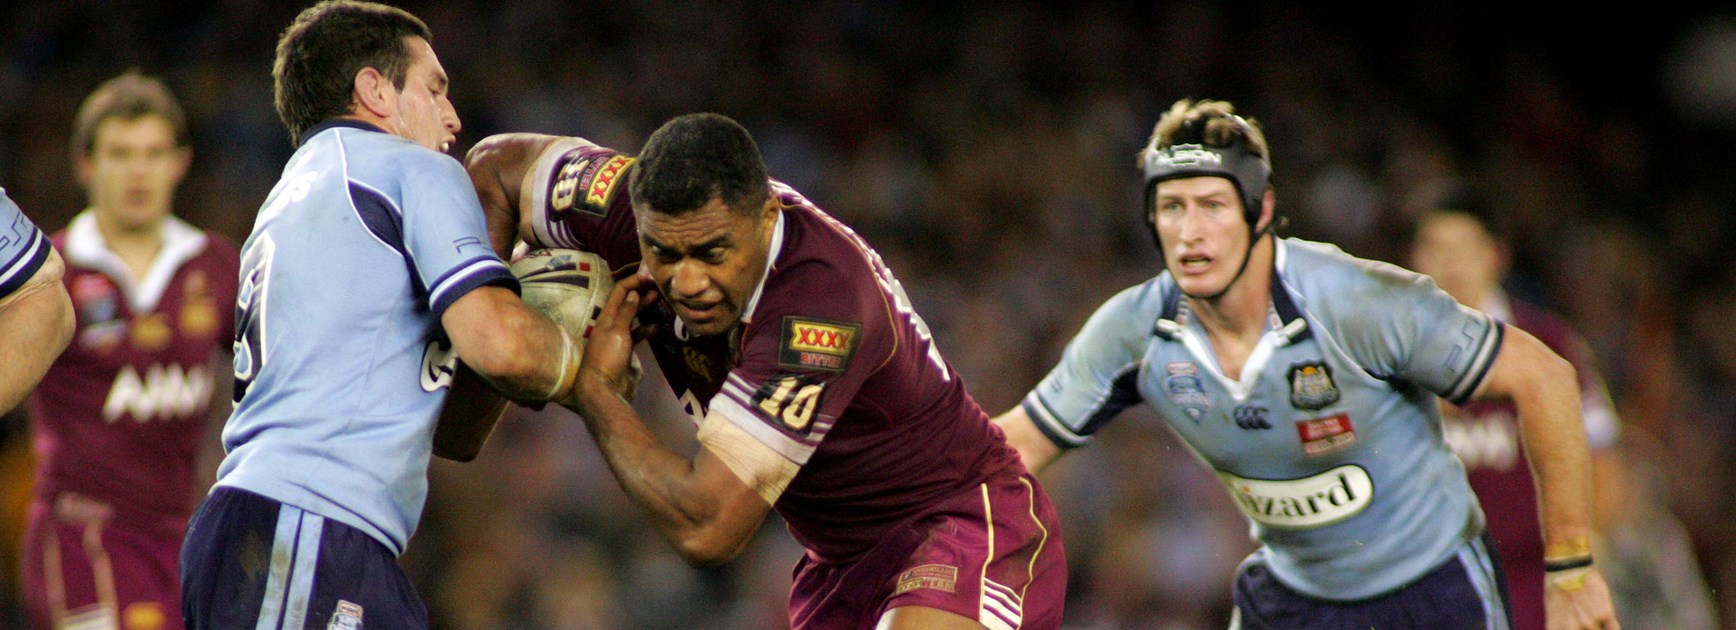 The driving force behind Petero's epic career